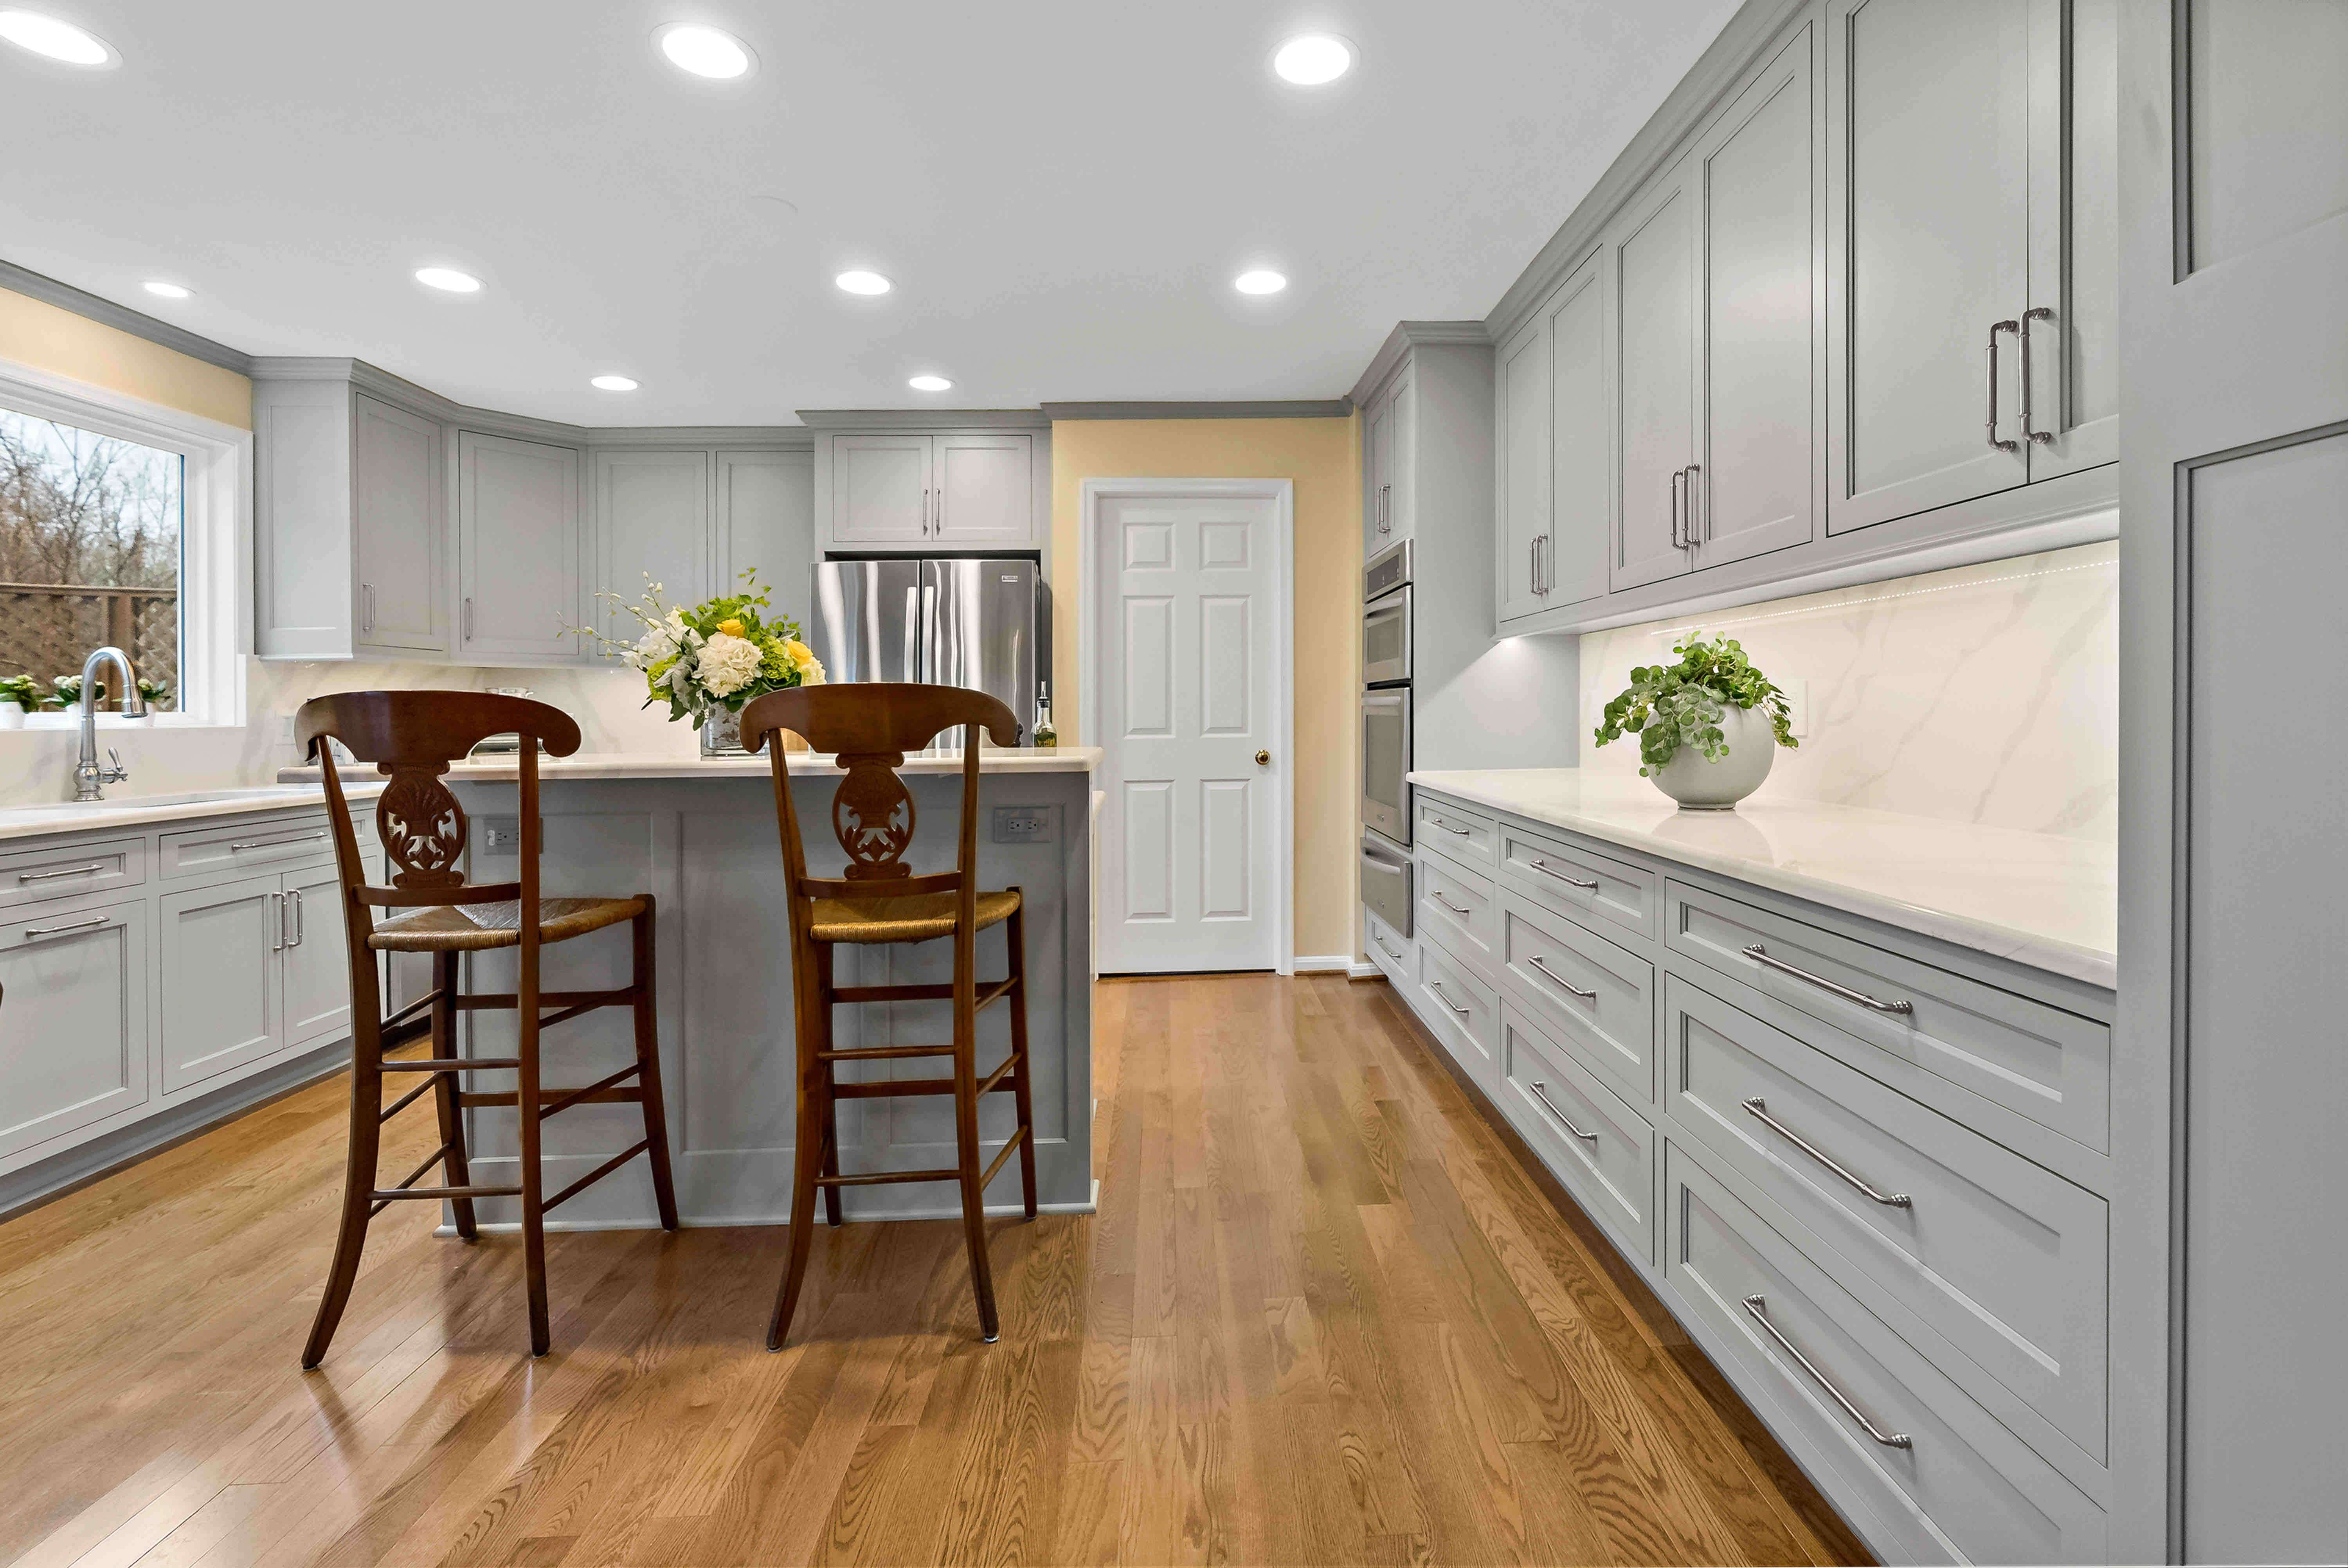 Reston Kitchen Receives Beautiful Contemporary Remodel 